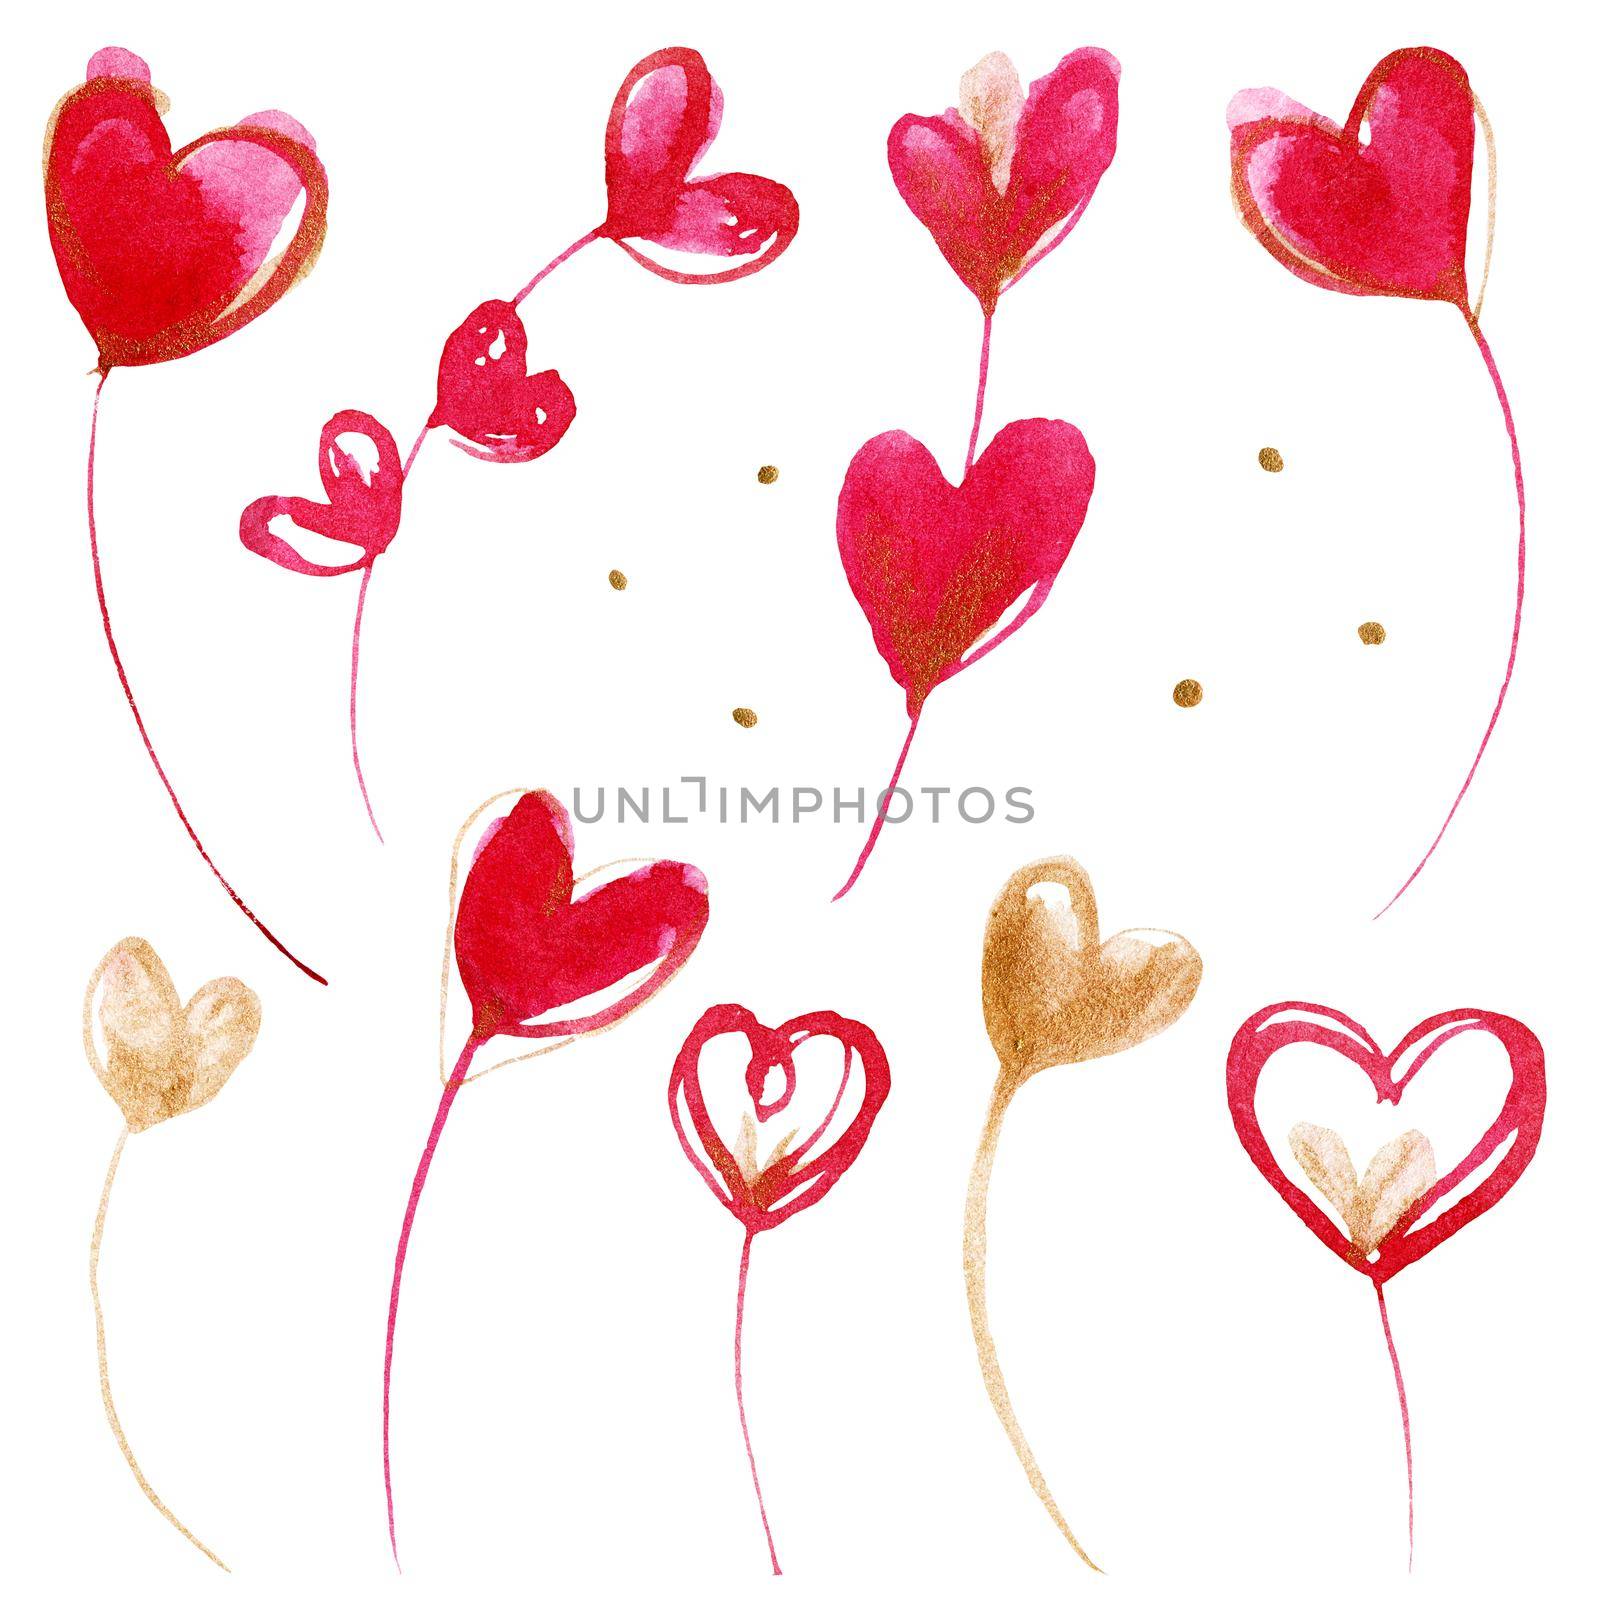 Pink hearts. Set of romantic watercolor elements by Xeniasnowstorm